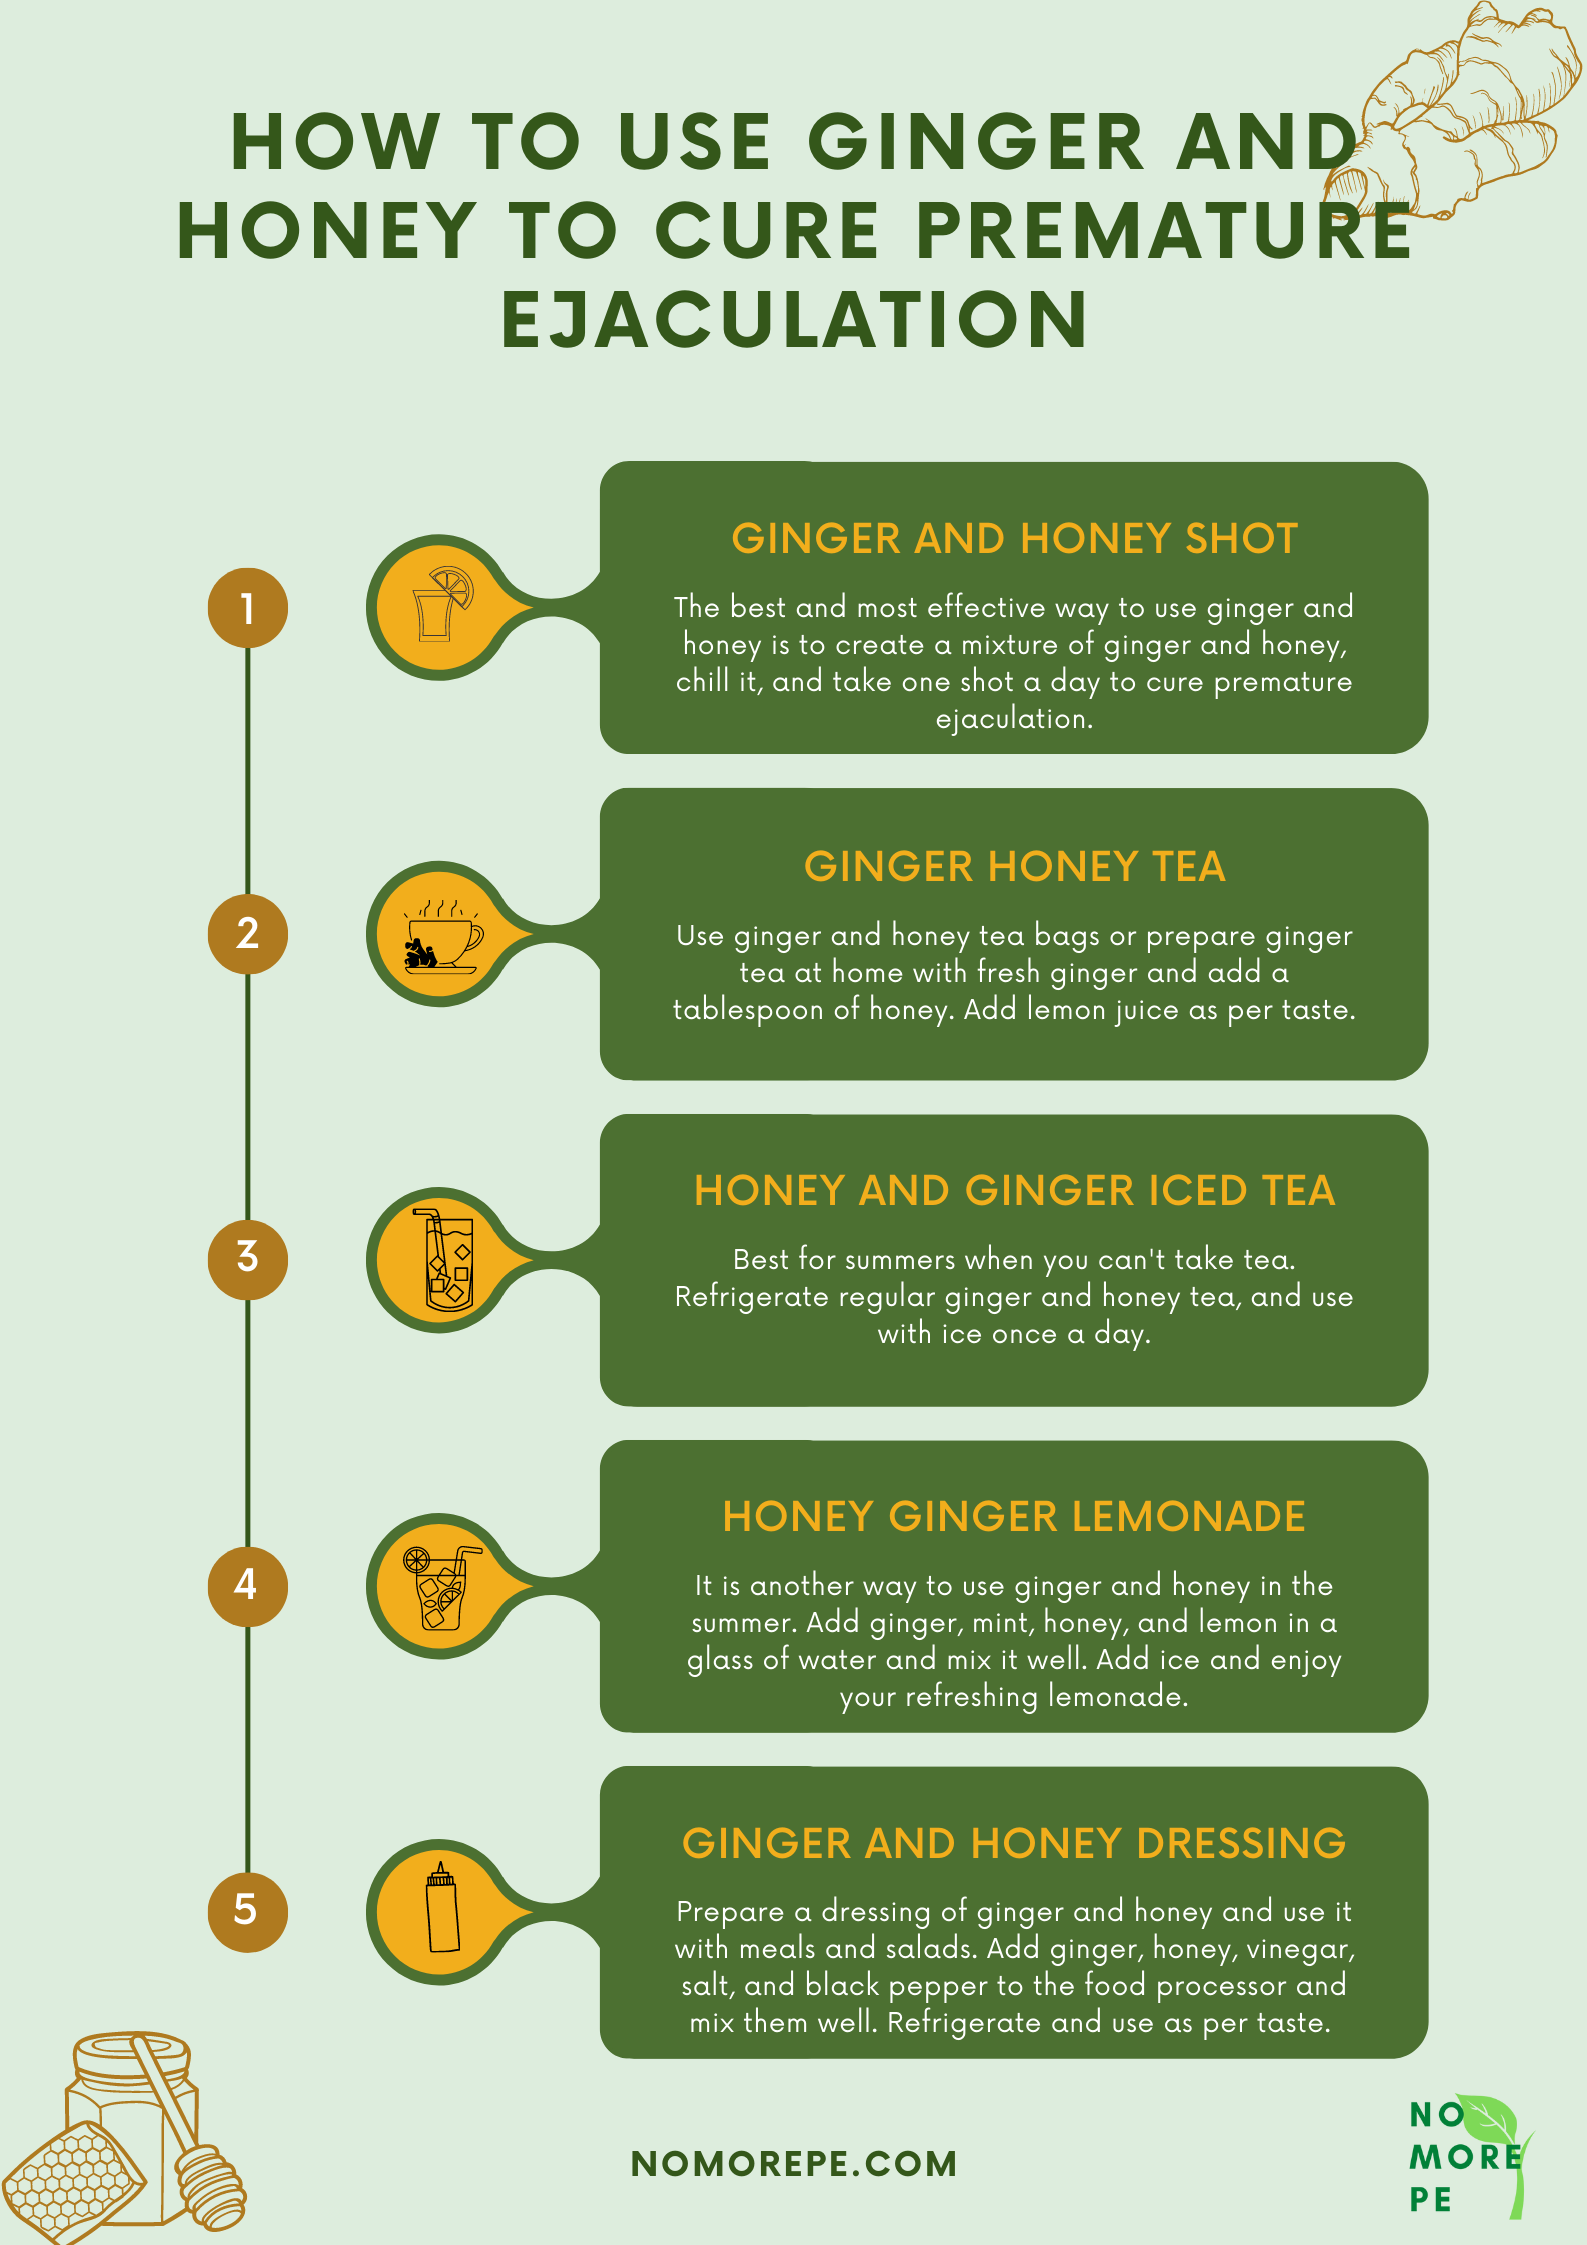 How to Use Ginger and Honey to Cure Premature Ejaculation